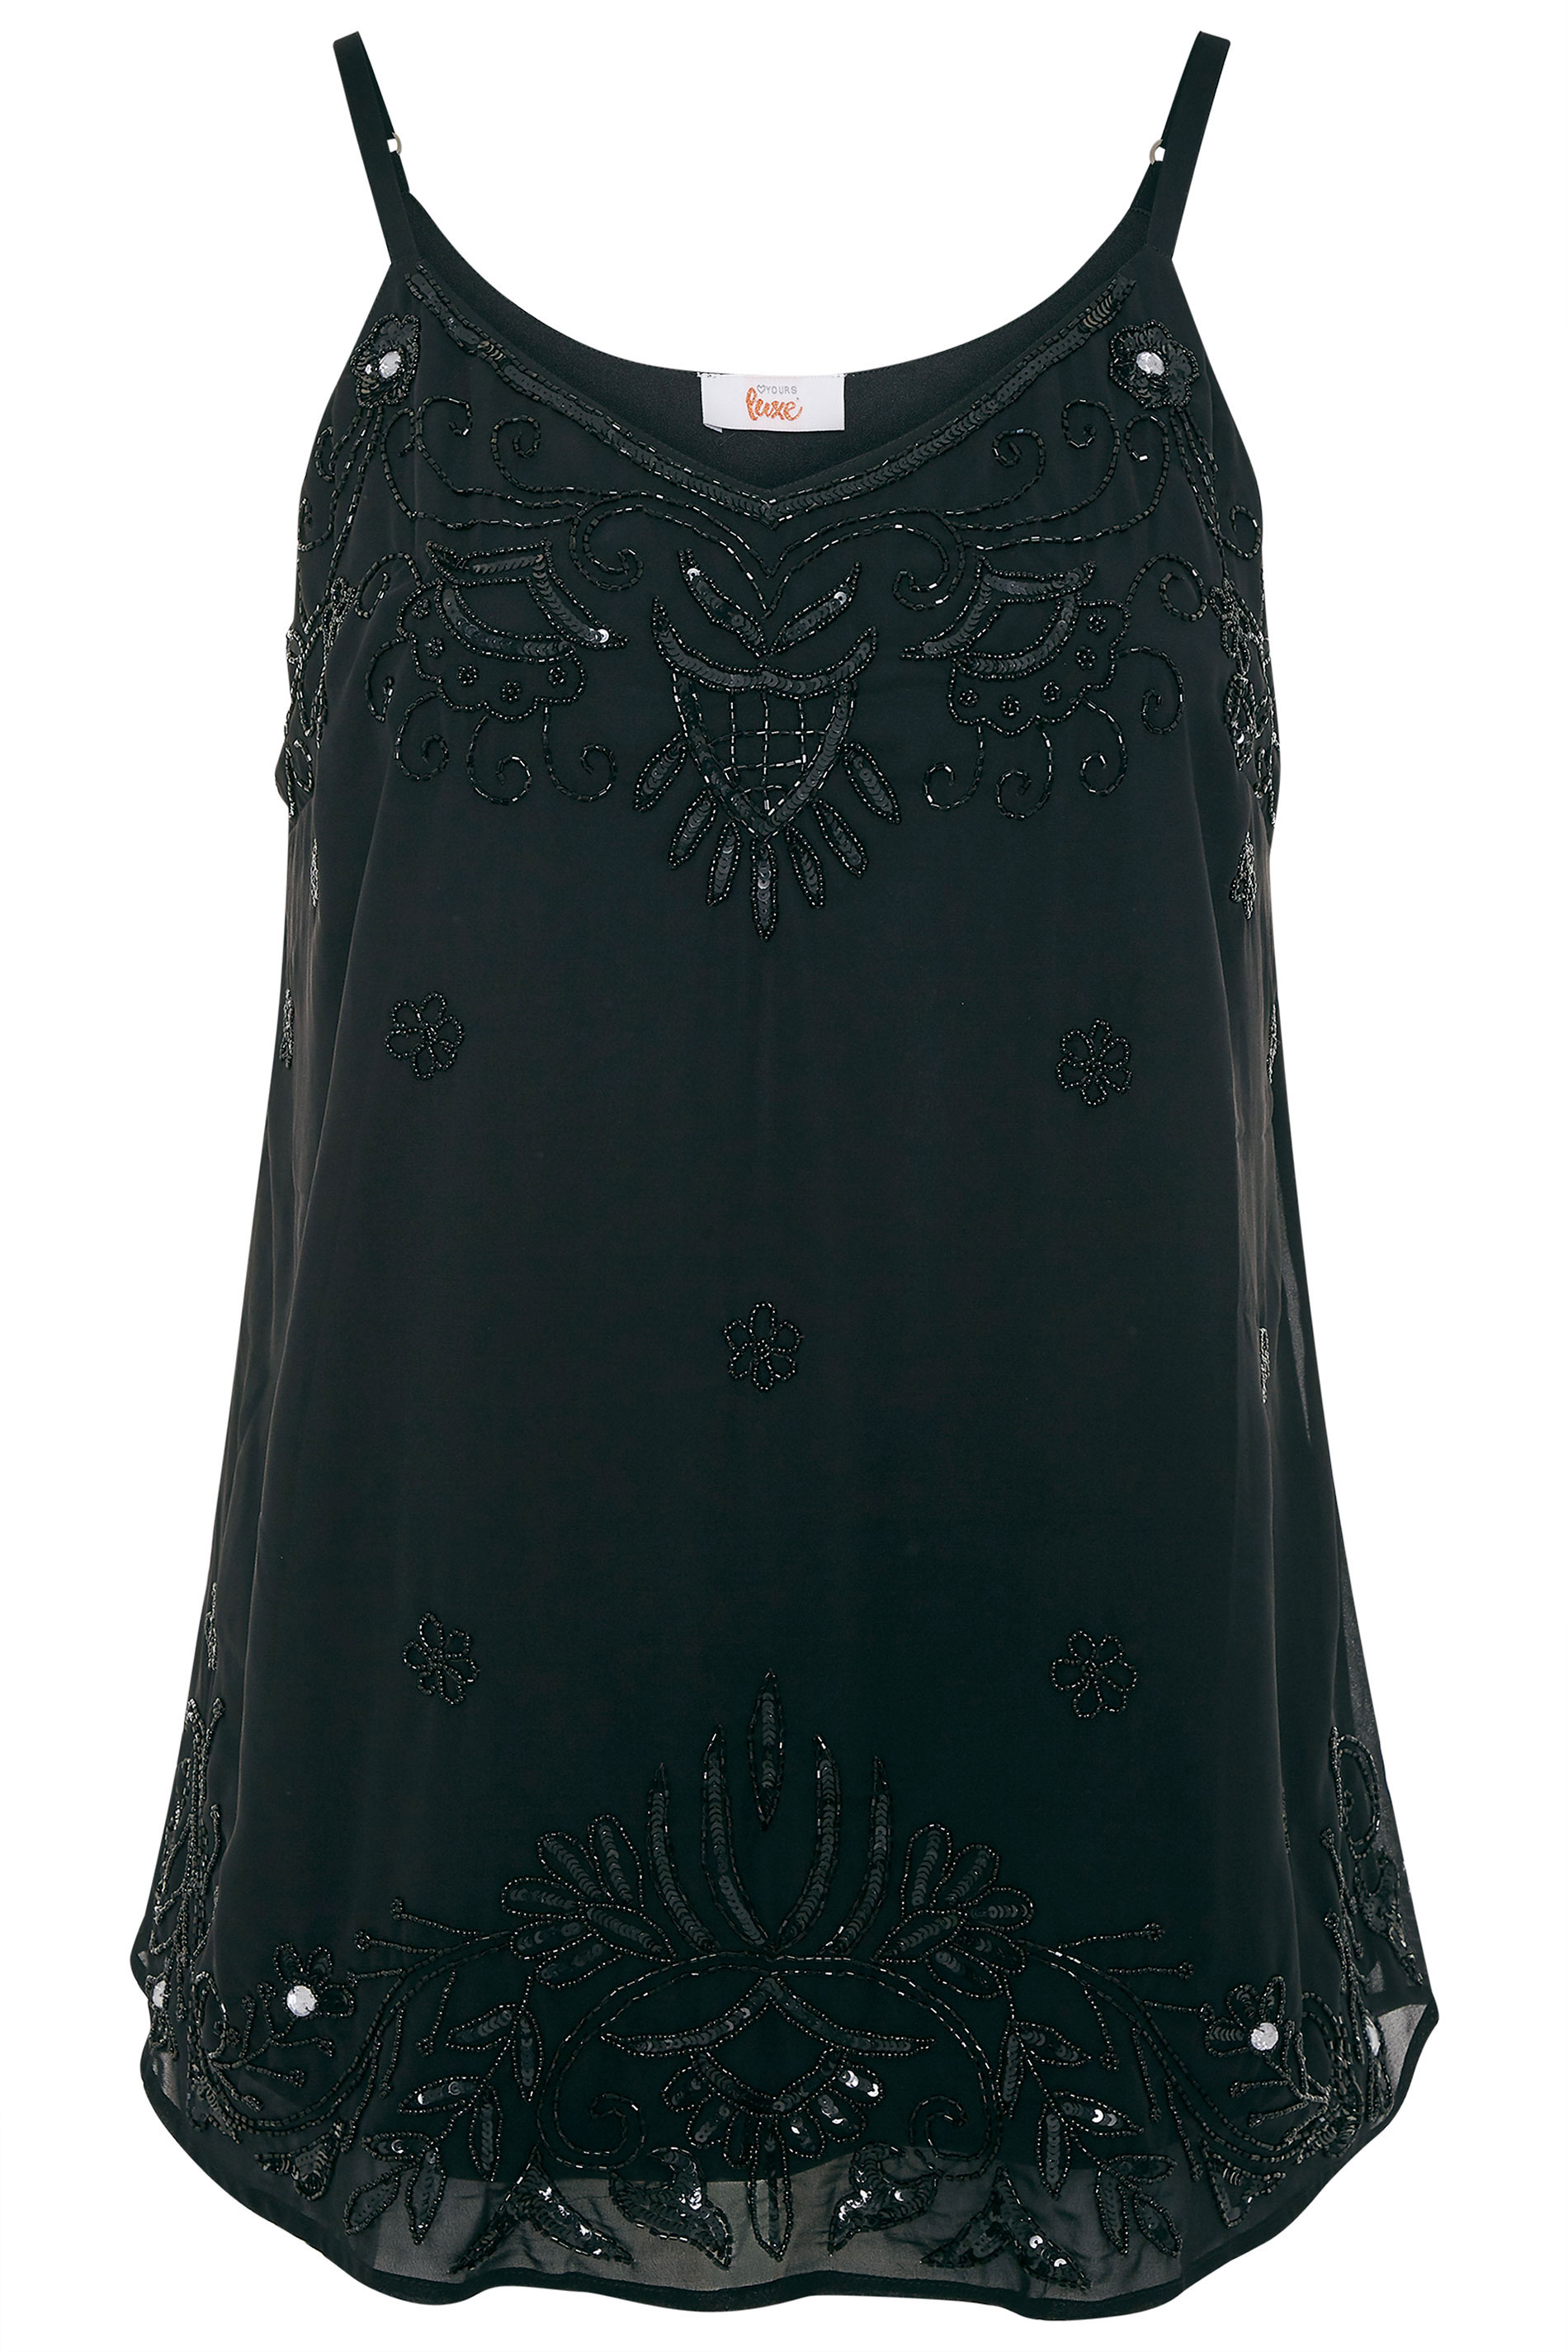 LUXE Black Floral Embellished Chiffon Cami Top | Yours Clothing